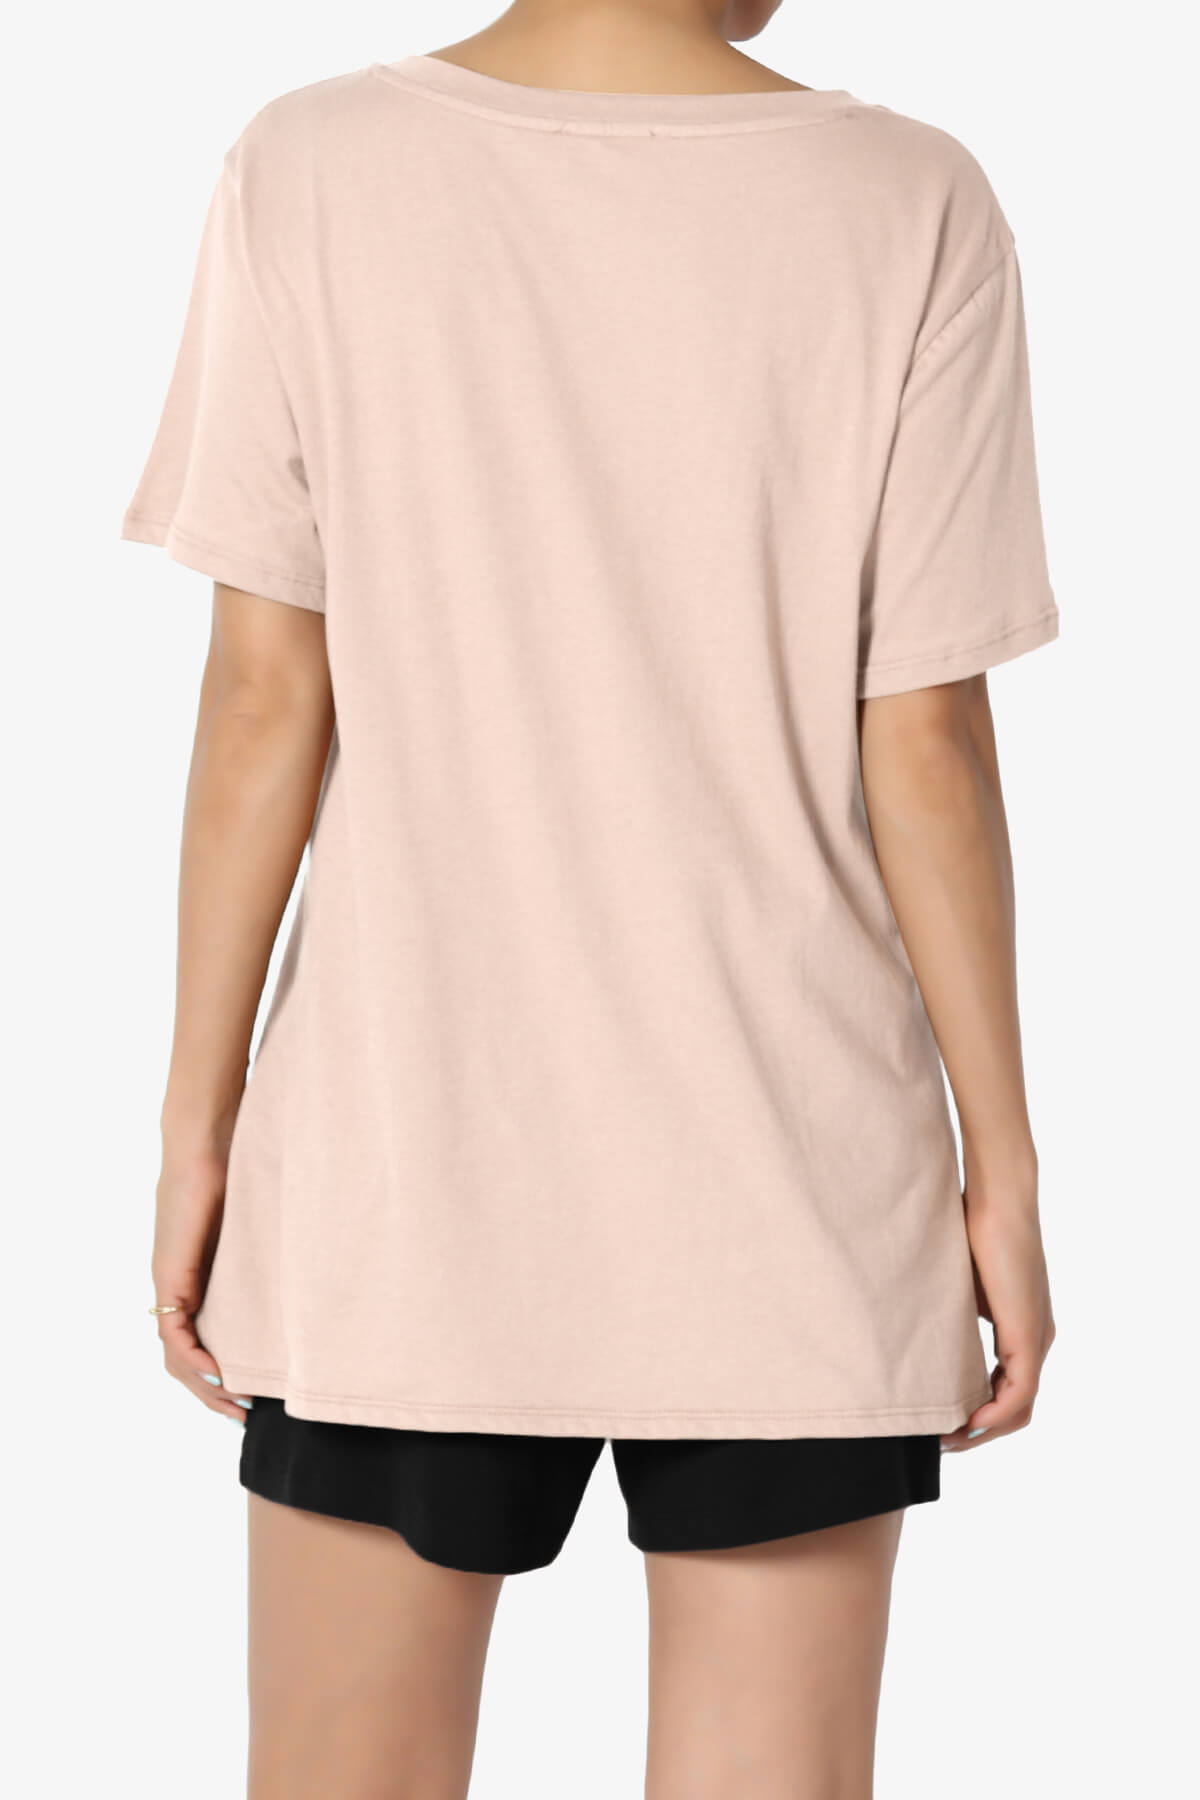 Load image into Gallery viewer, Mayra V-Neck Cotton Boyfriend Tee DUSTY BLUSH_2
